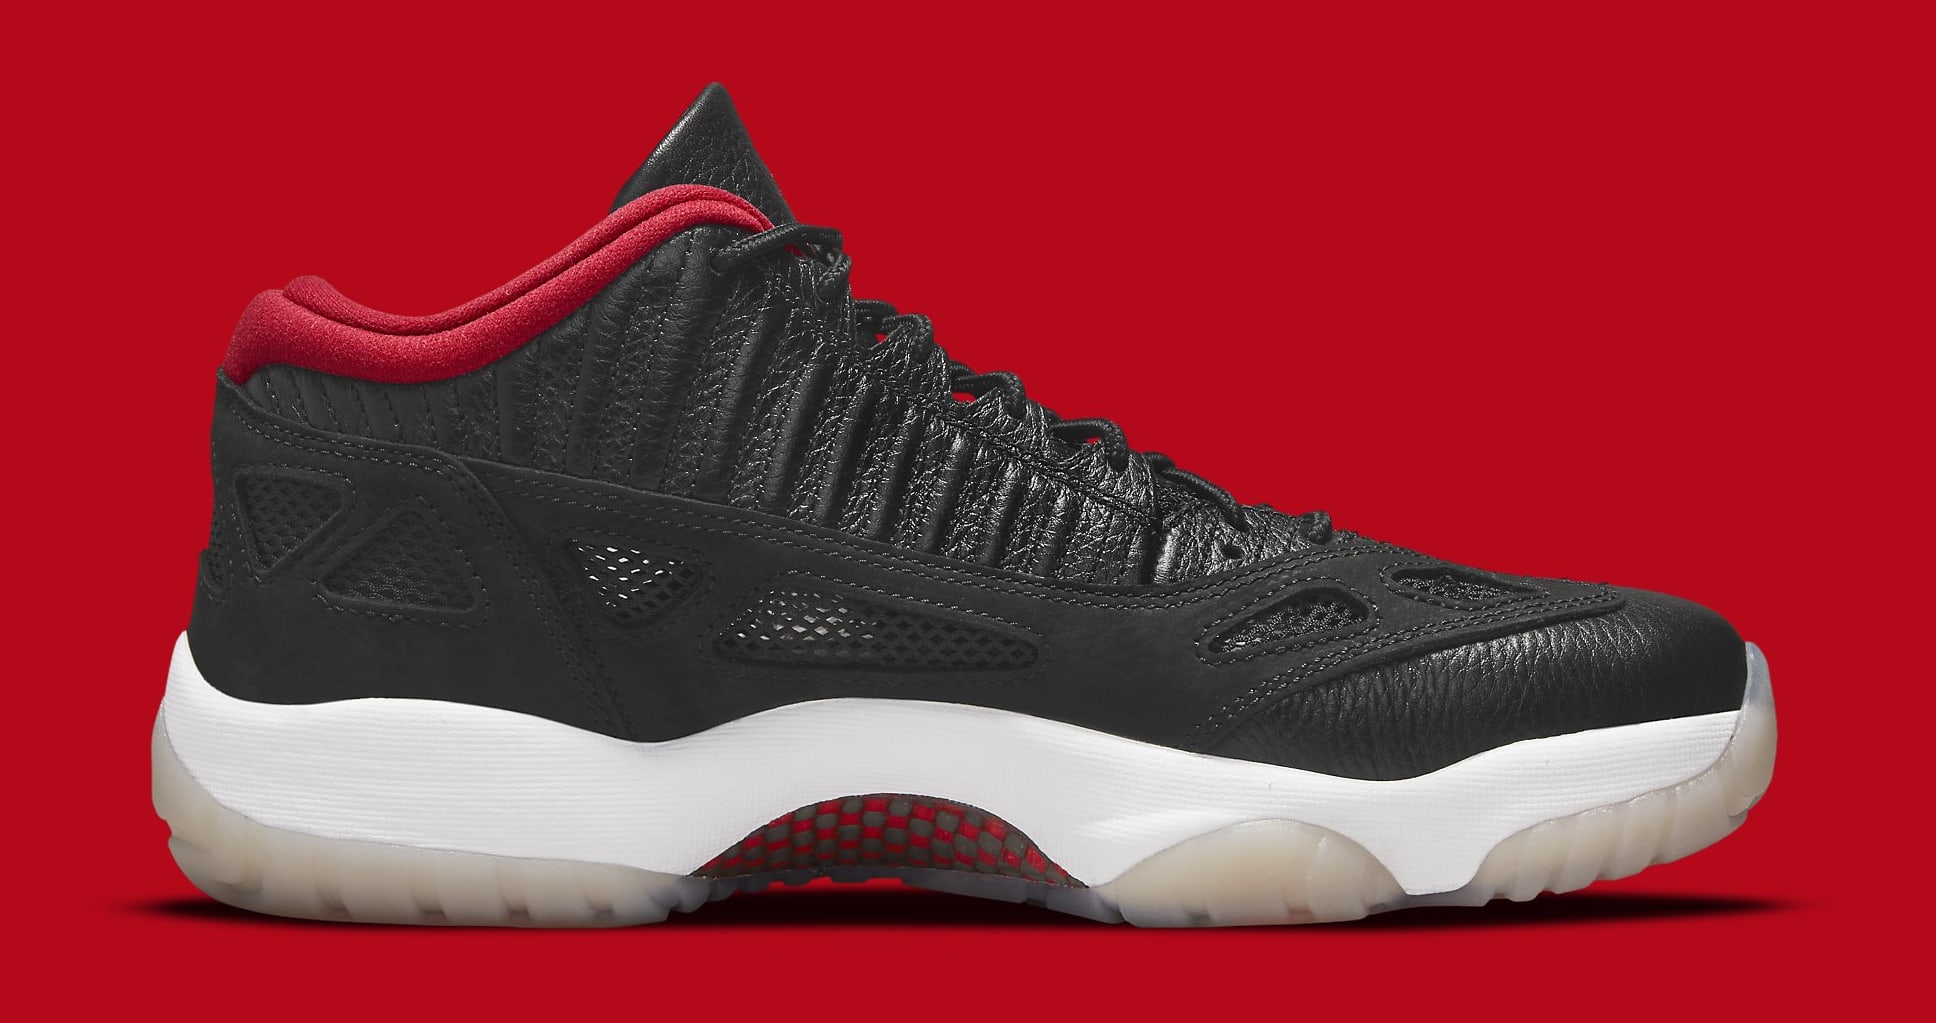 Best Look Yet at the 'Bred' Air Jordan 11 Low IE | Complex